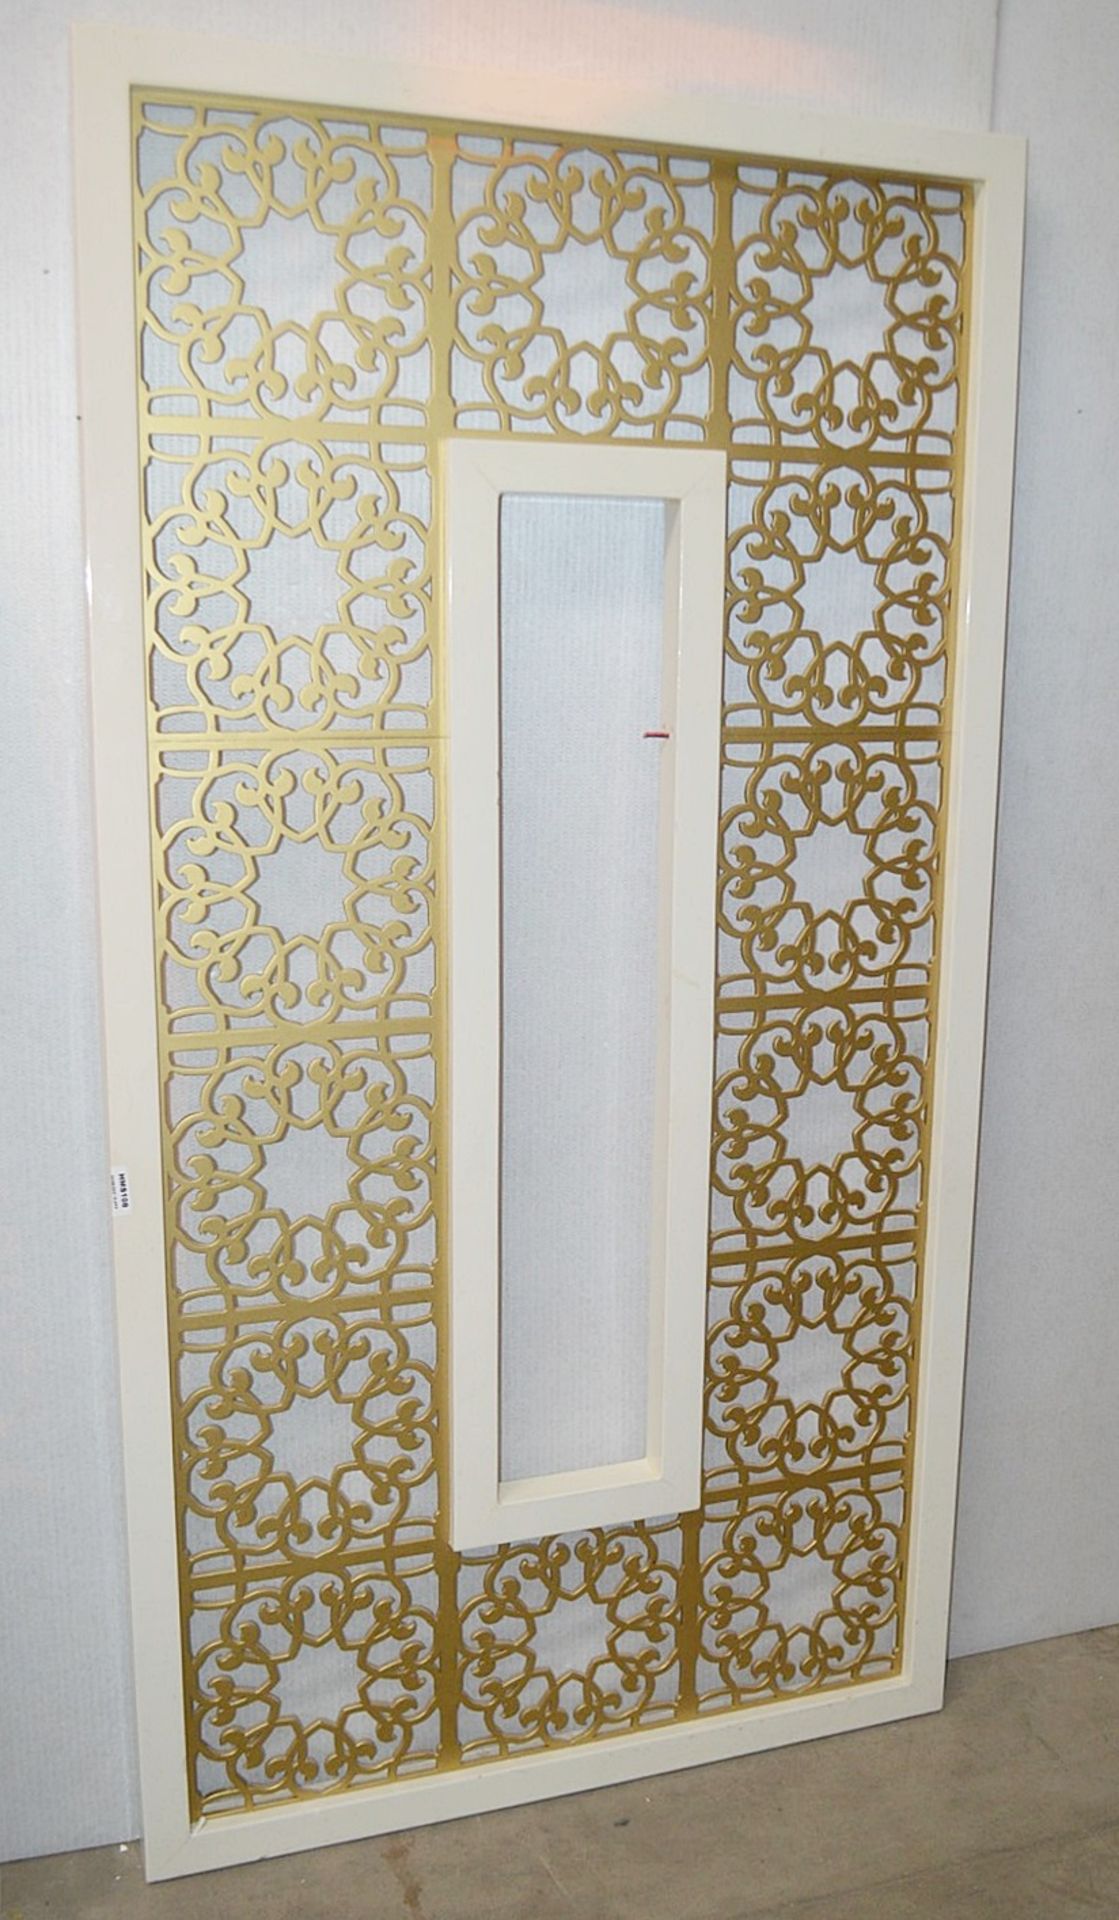 A Set Of 3 x Moroccan-style Room Divider Screen Panels - Ref: HMS108 - CL668 - Location: - Image 5 of 6